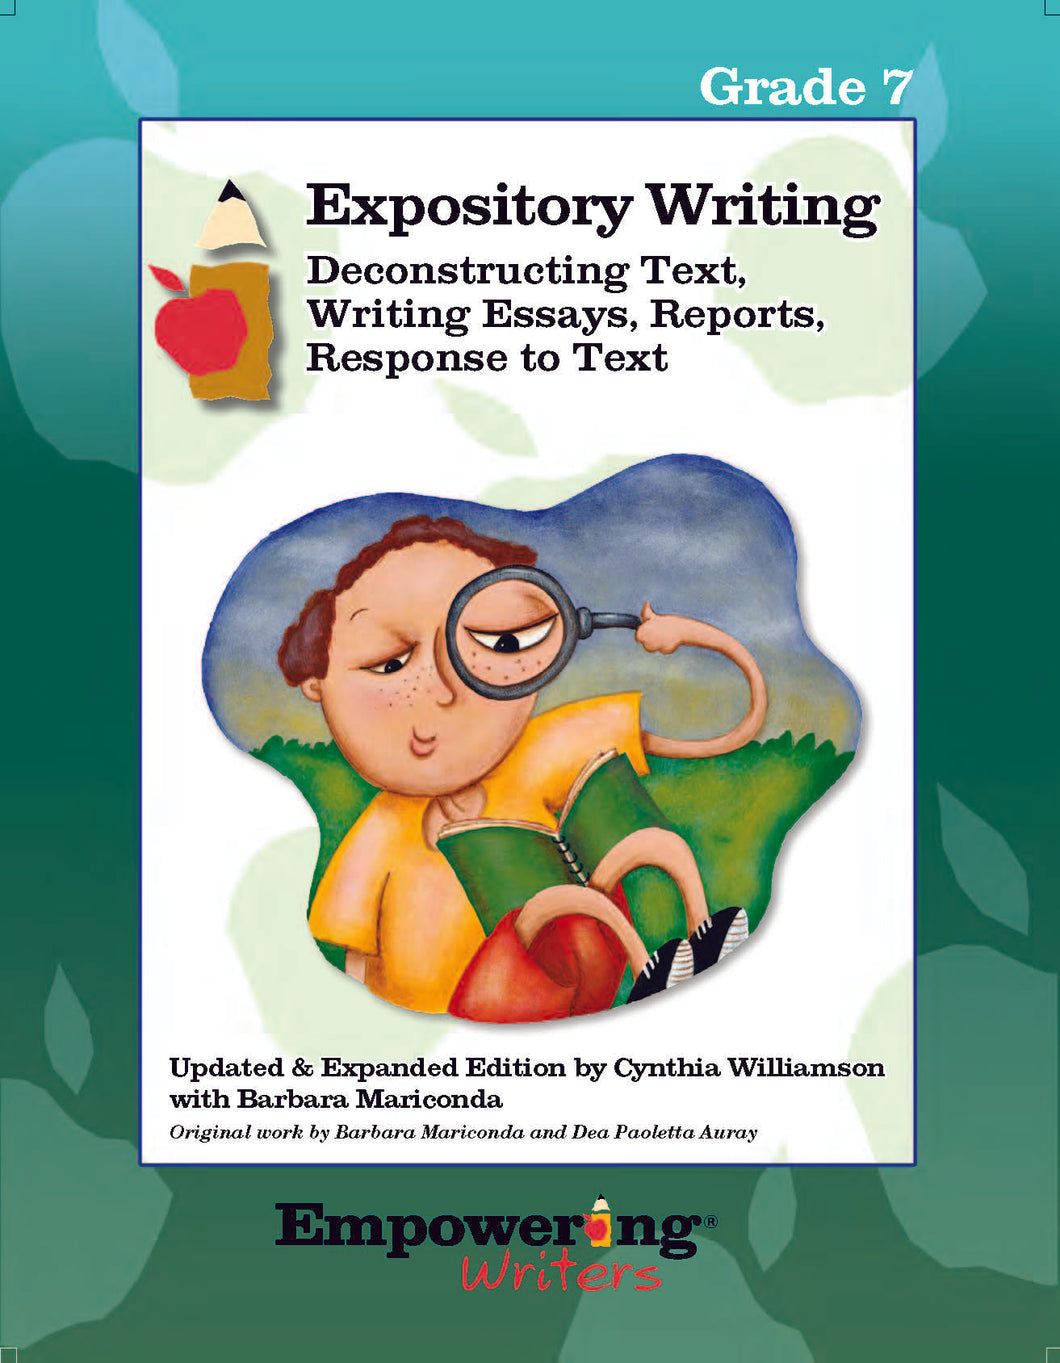 Grade 7 Informational/Expository Writing Guide (printed) - U.S.